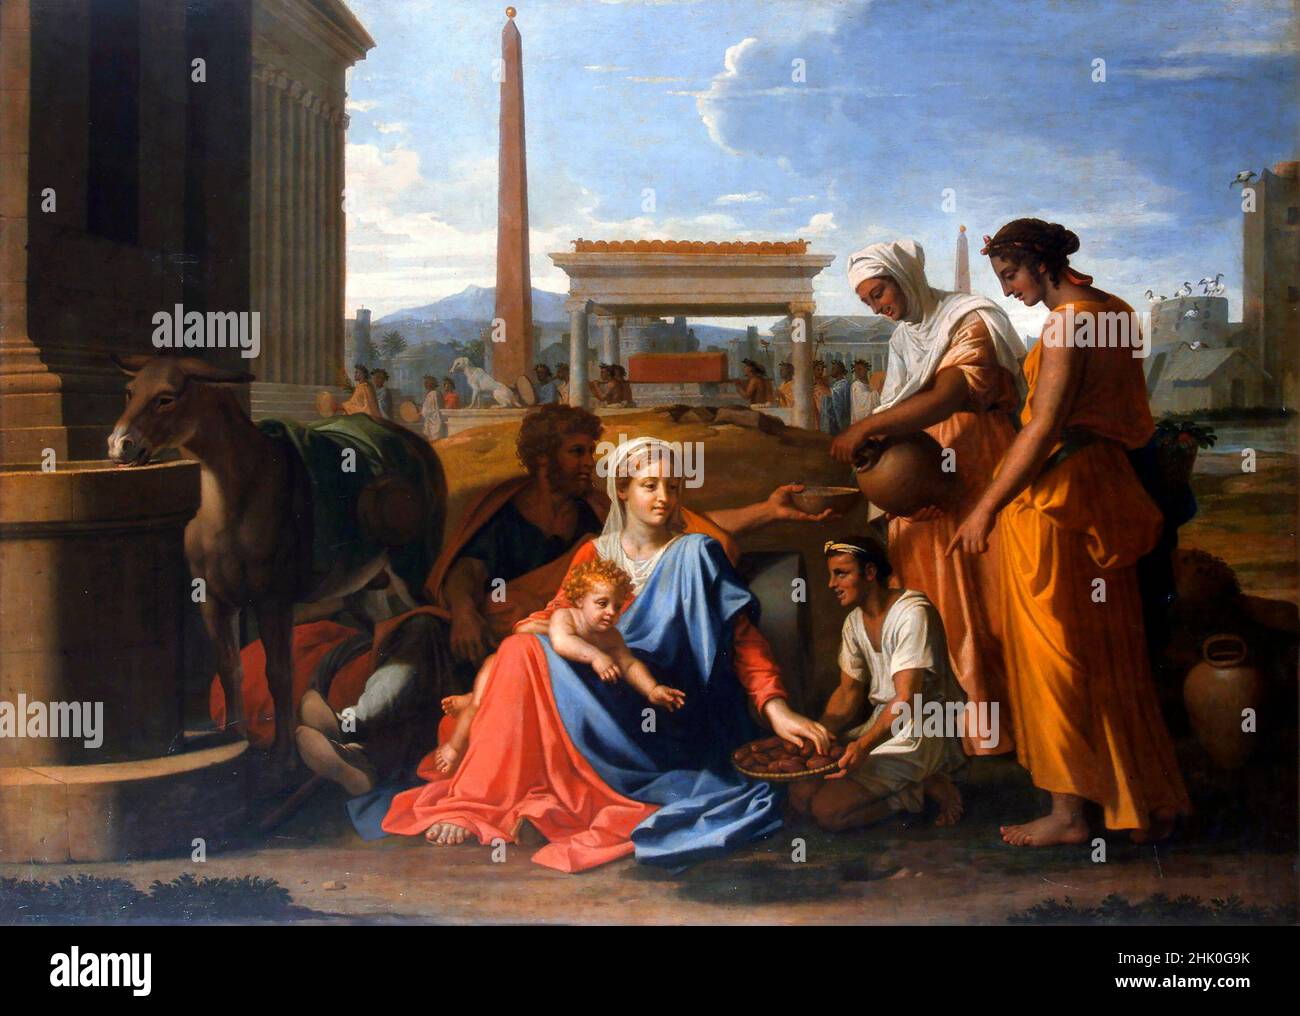 The Holy Family in Egypt by Nicolas Poussin, oil on canvas, 1655-57 Stock Photo